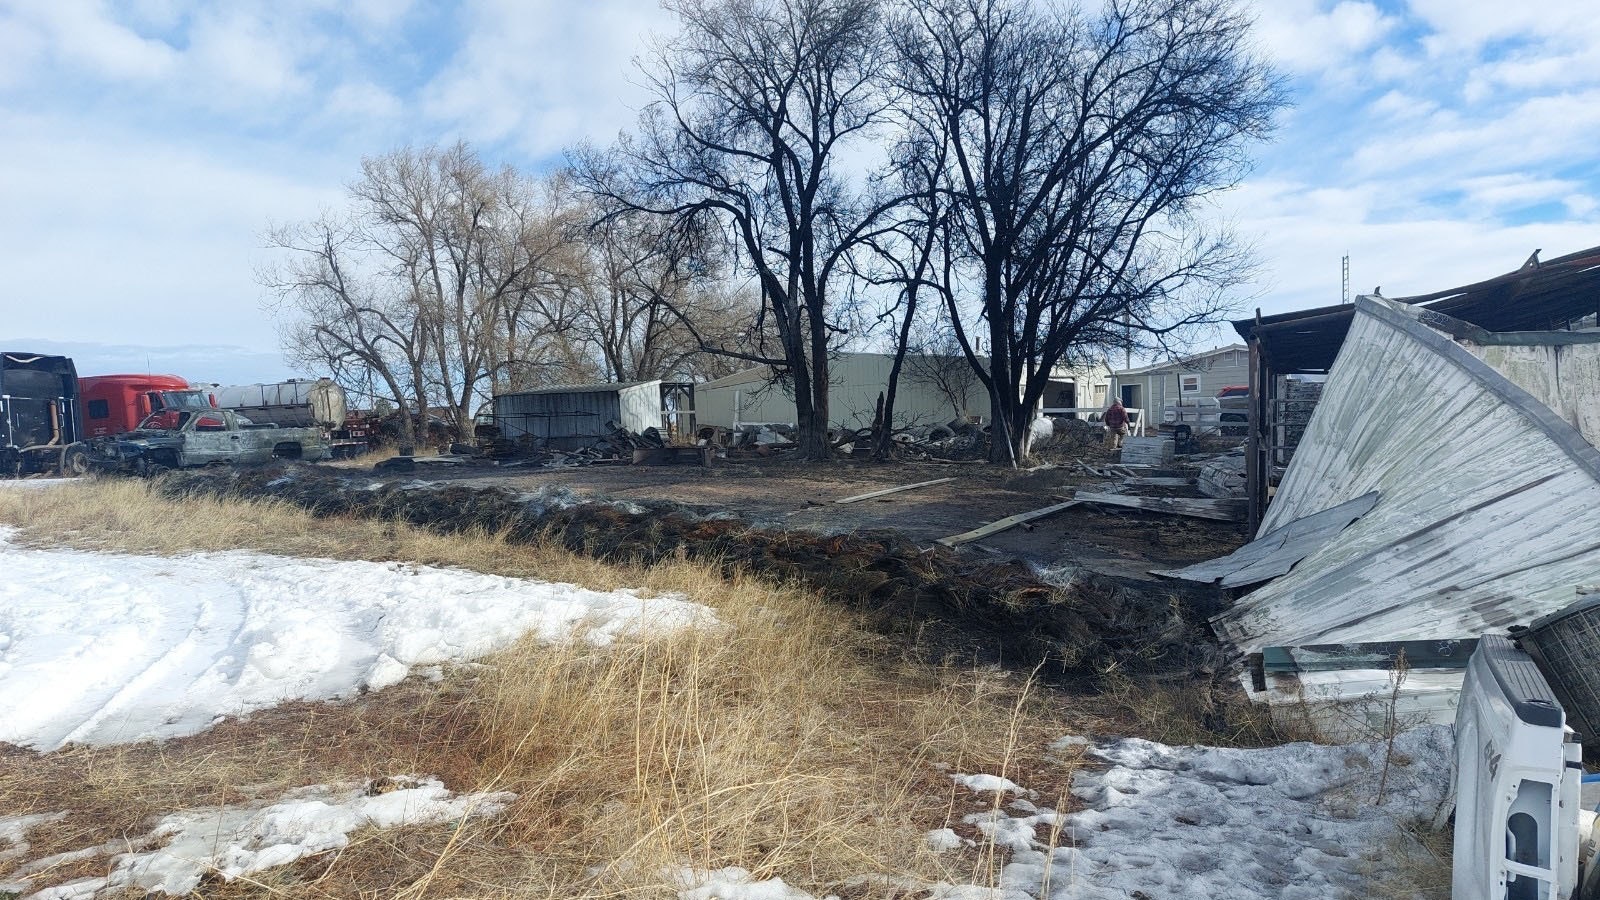 An eastern Wyoming horse ranching family lost 11 horses in a barn fire early Sunday morning.